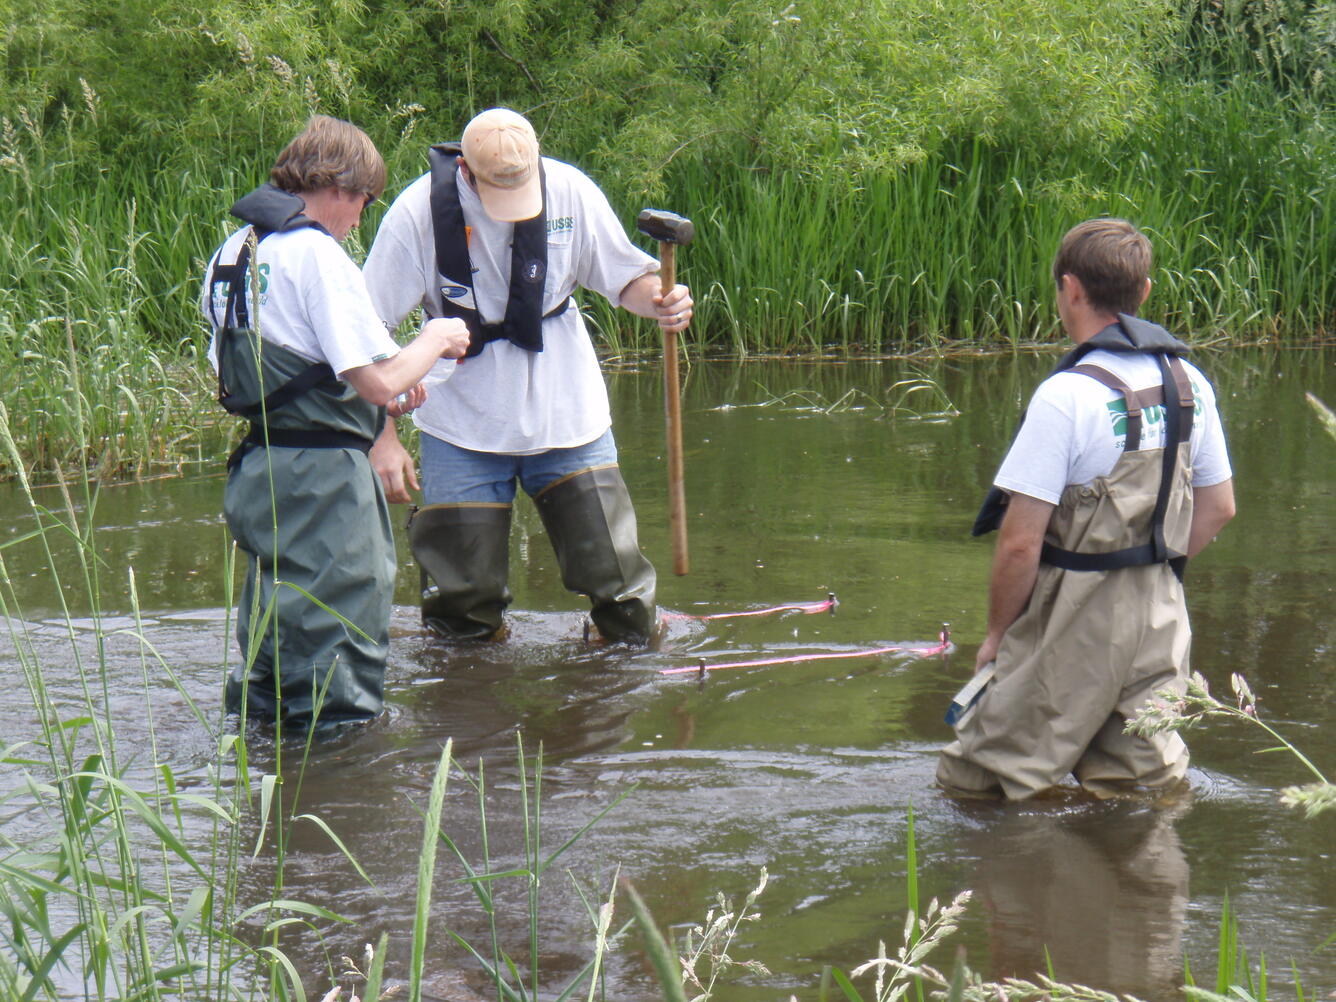 USGS scientists installing passive sediment samplers in an irrigation ditch near Hancock, Wisconsin